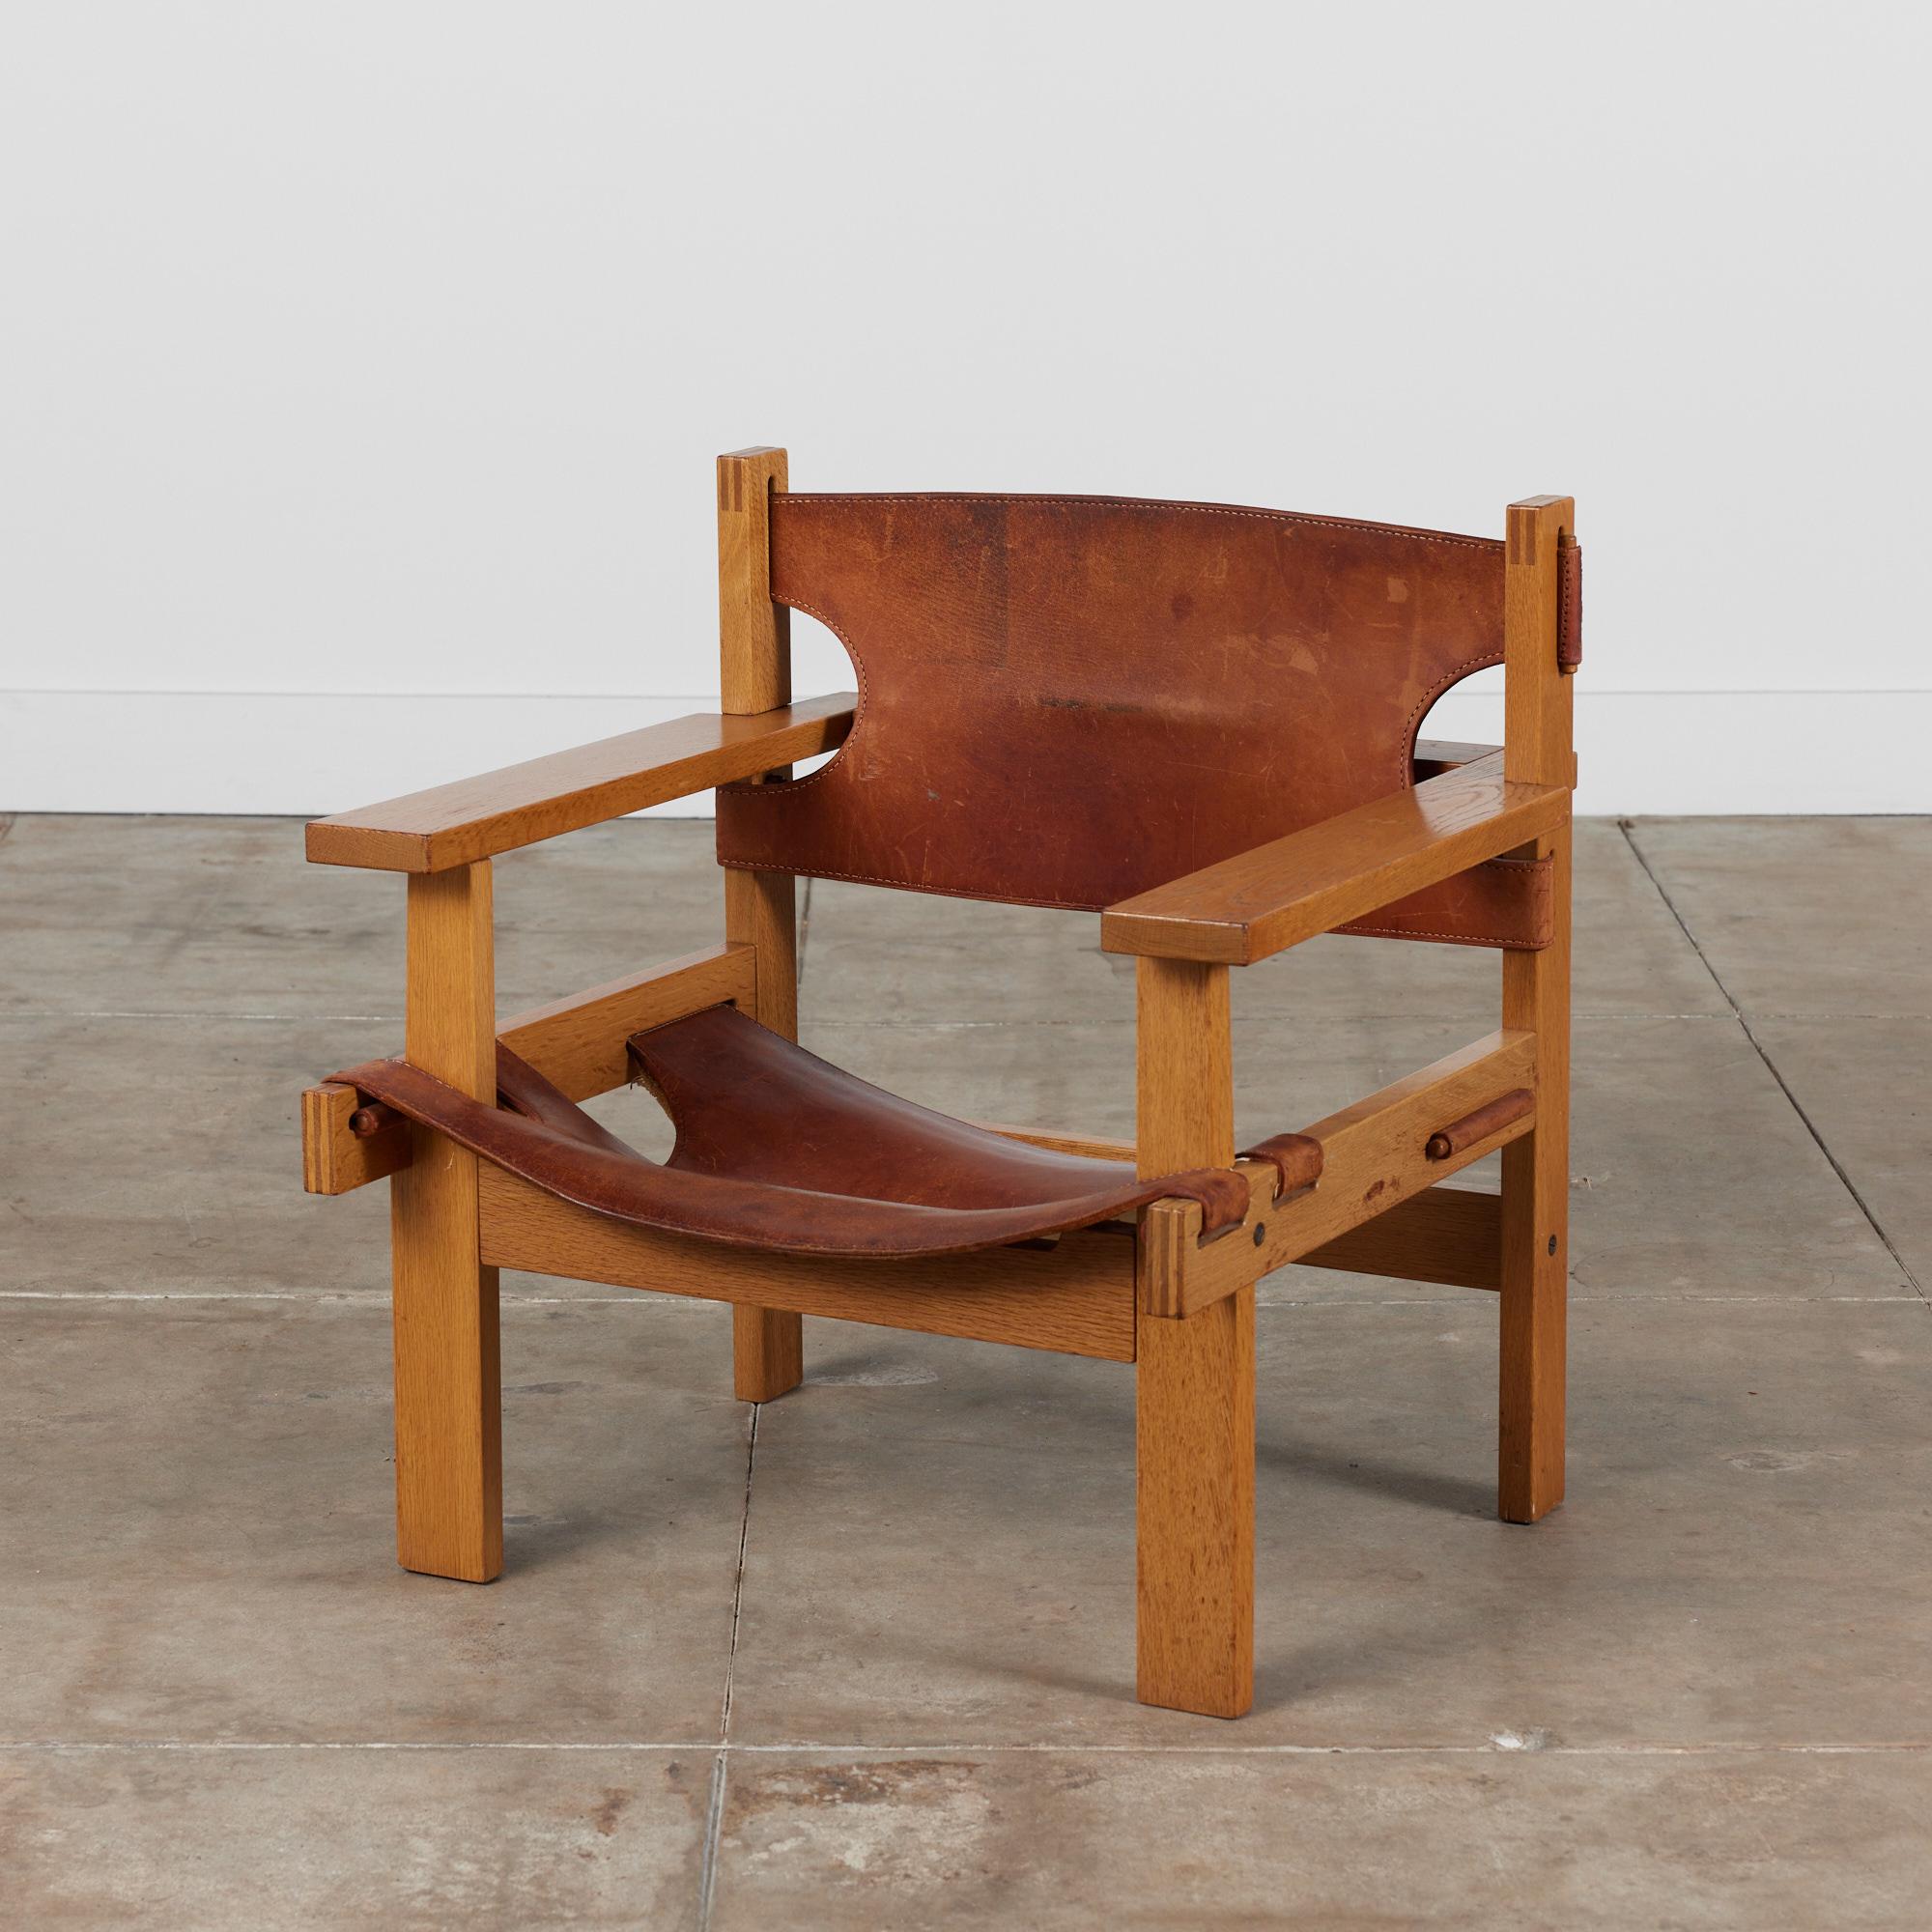 Lounge chair by Gunnar H. Guðmundsson, circa 1960s, Iceland. The low slug safari style lounge chair also referred to as the 